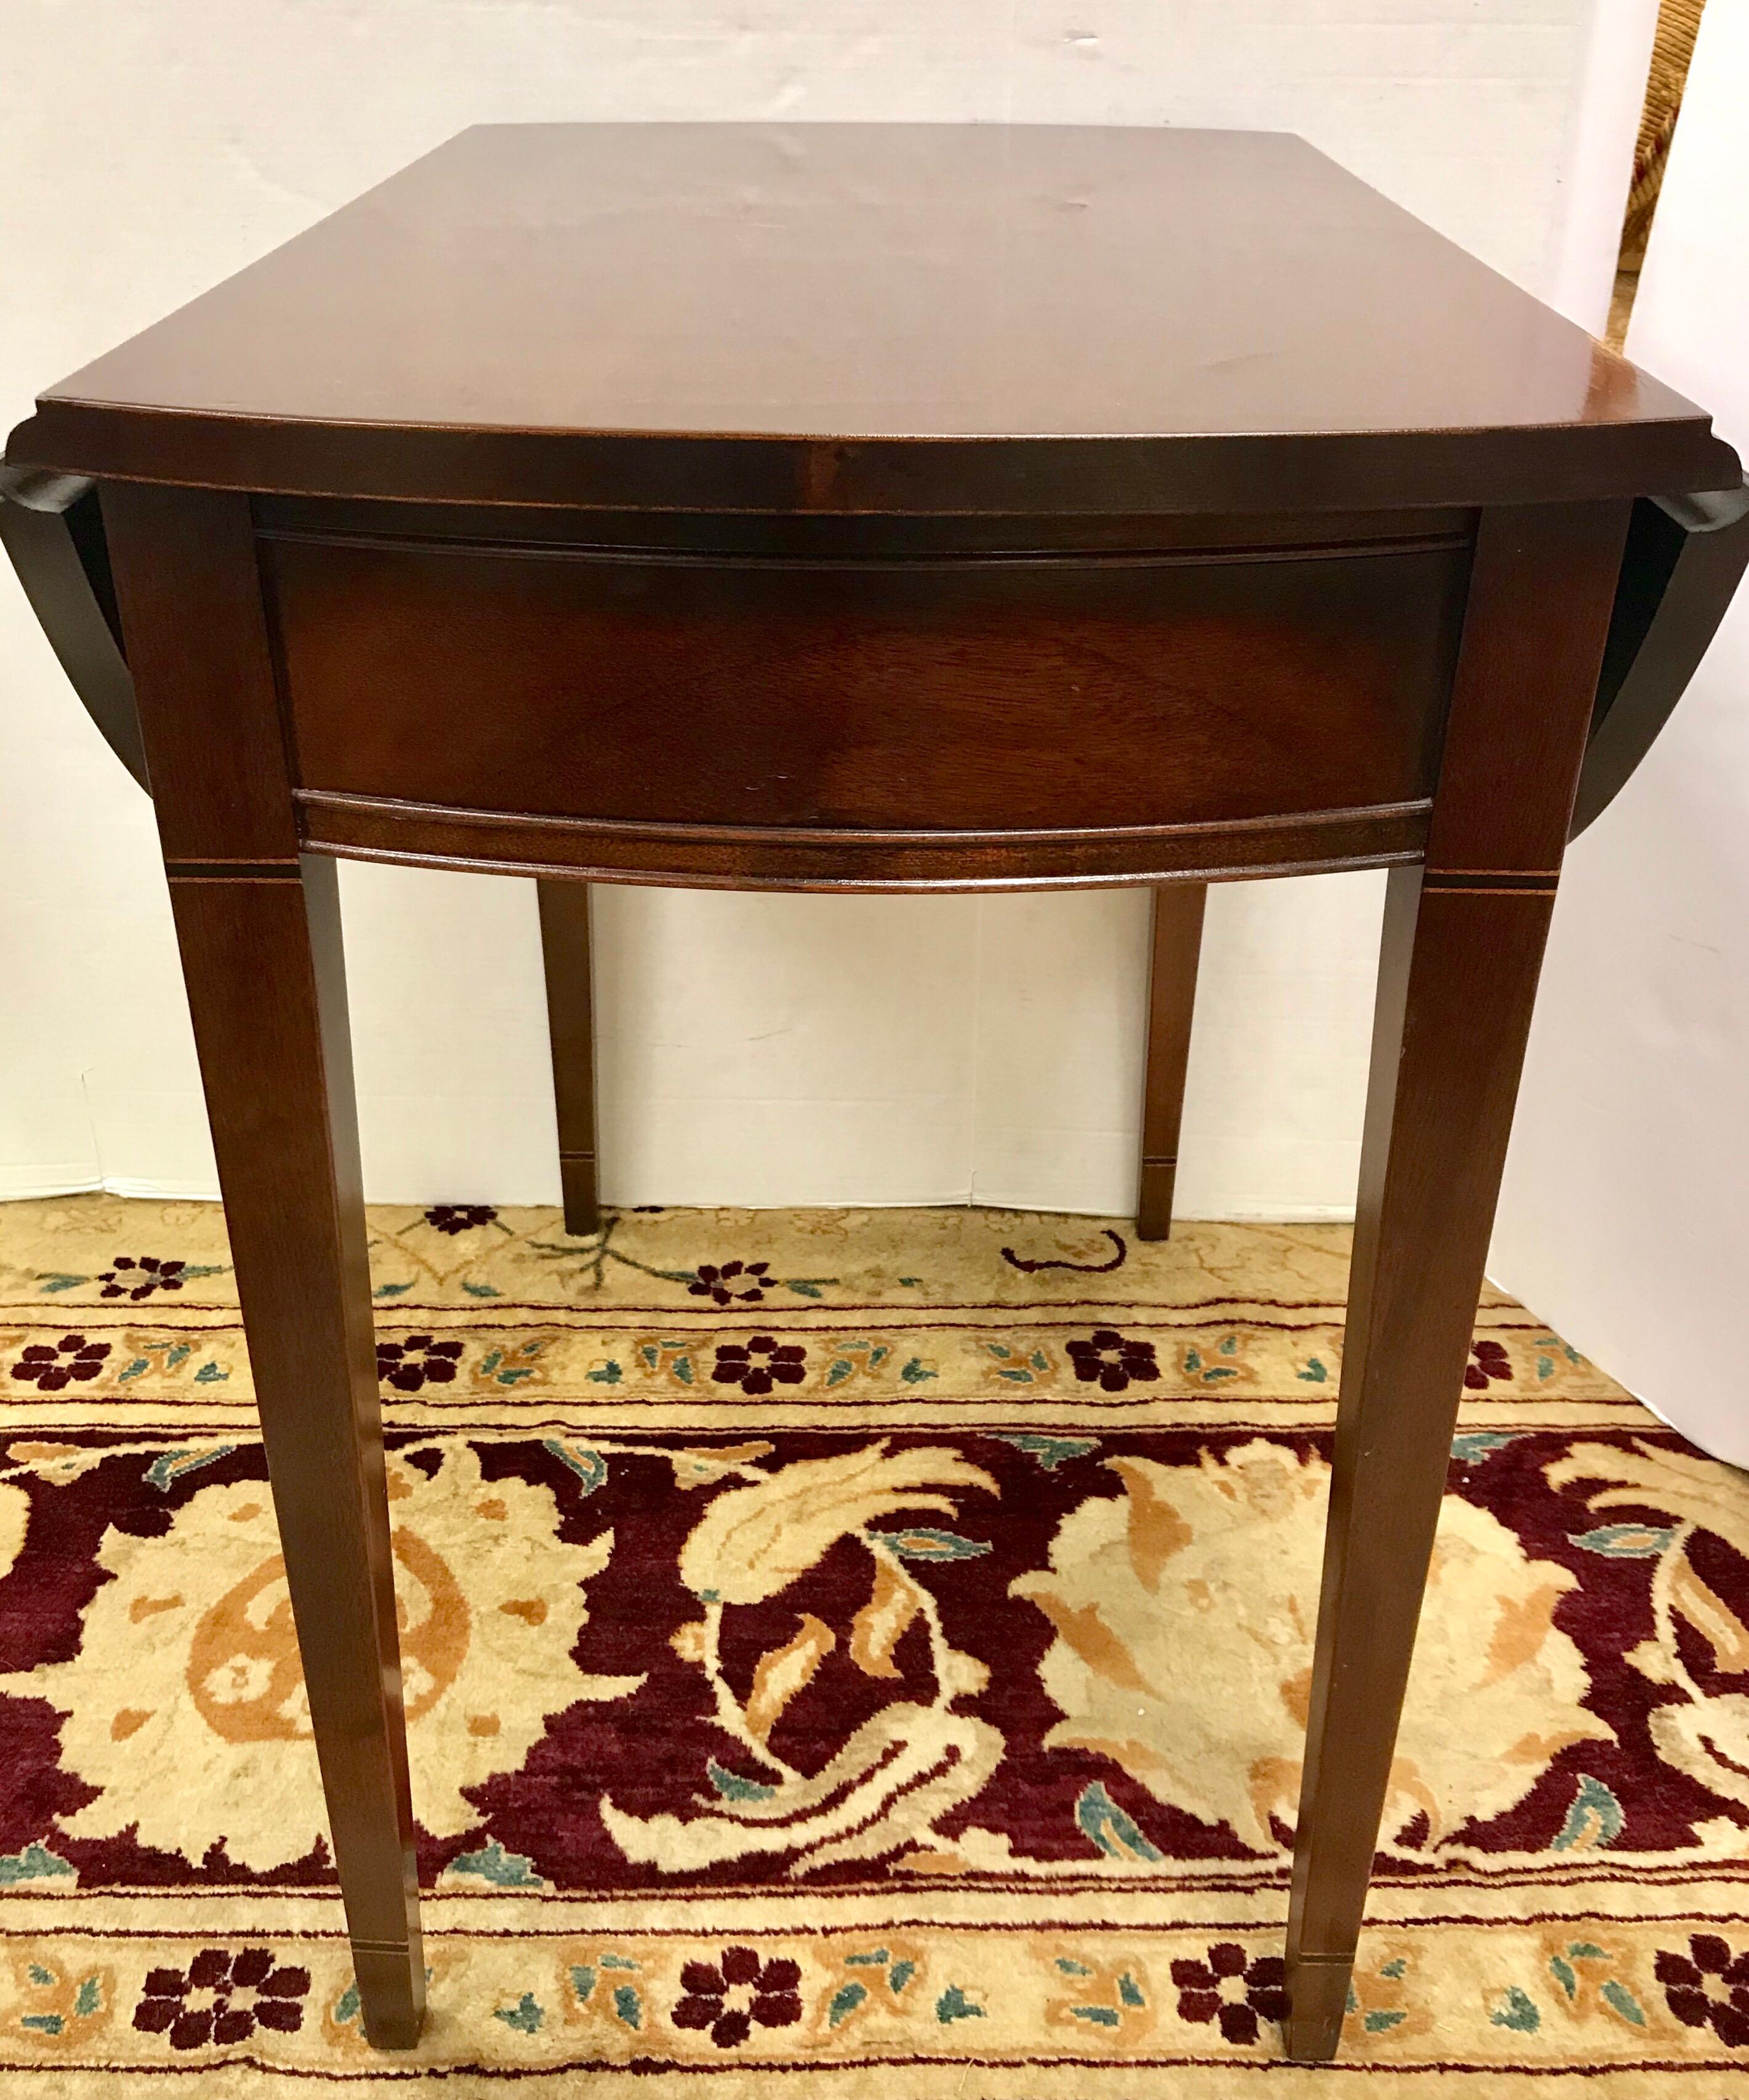 20th Century Pair of Hickory Chair Federal Mahogany Inlay Drop-leaf End Tables